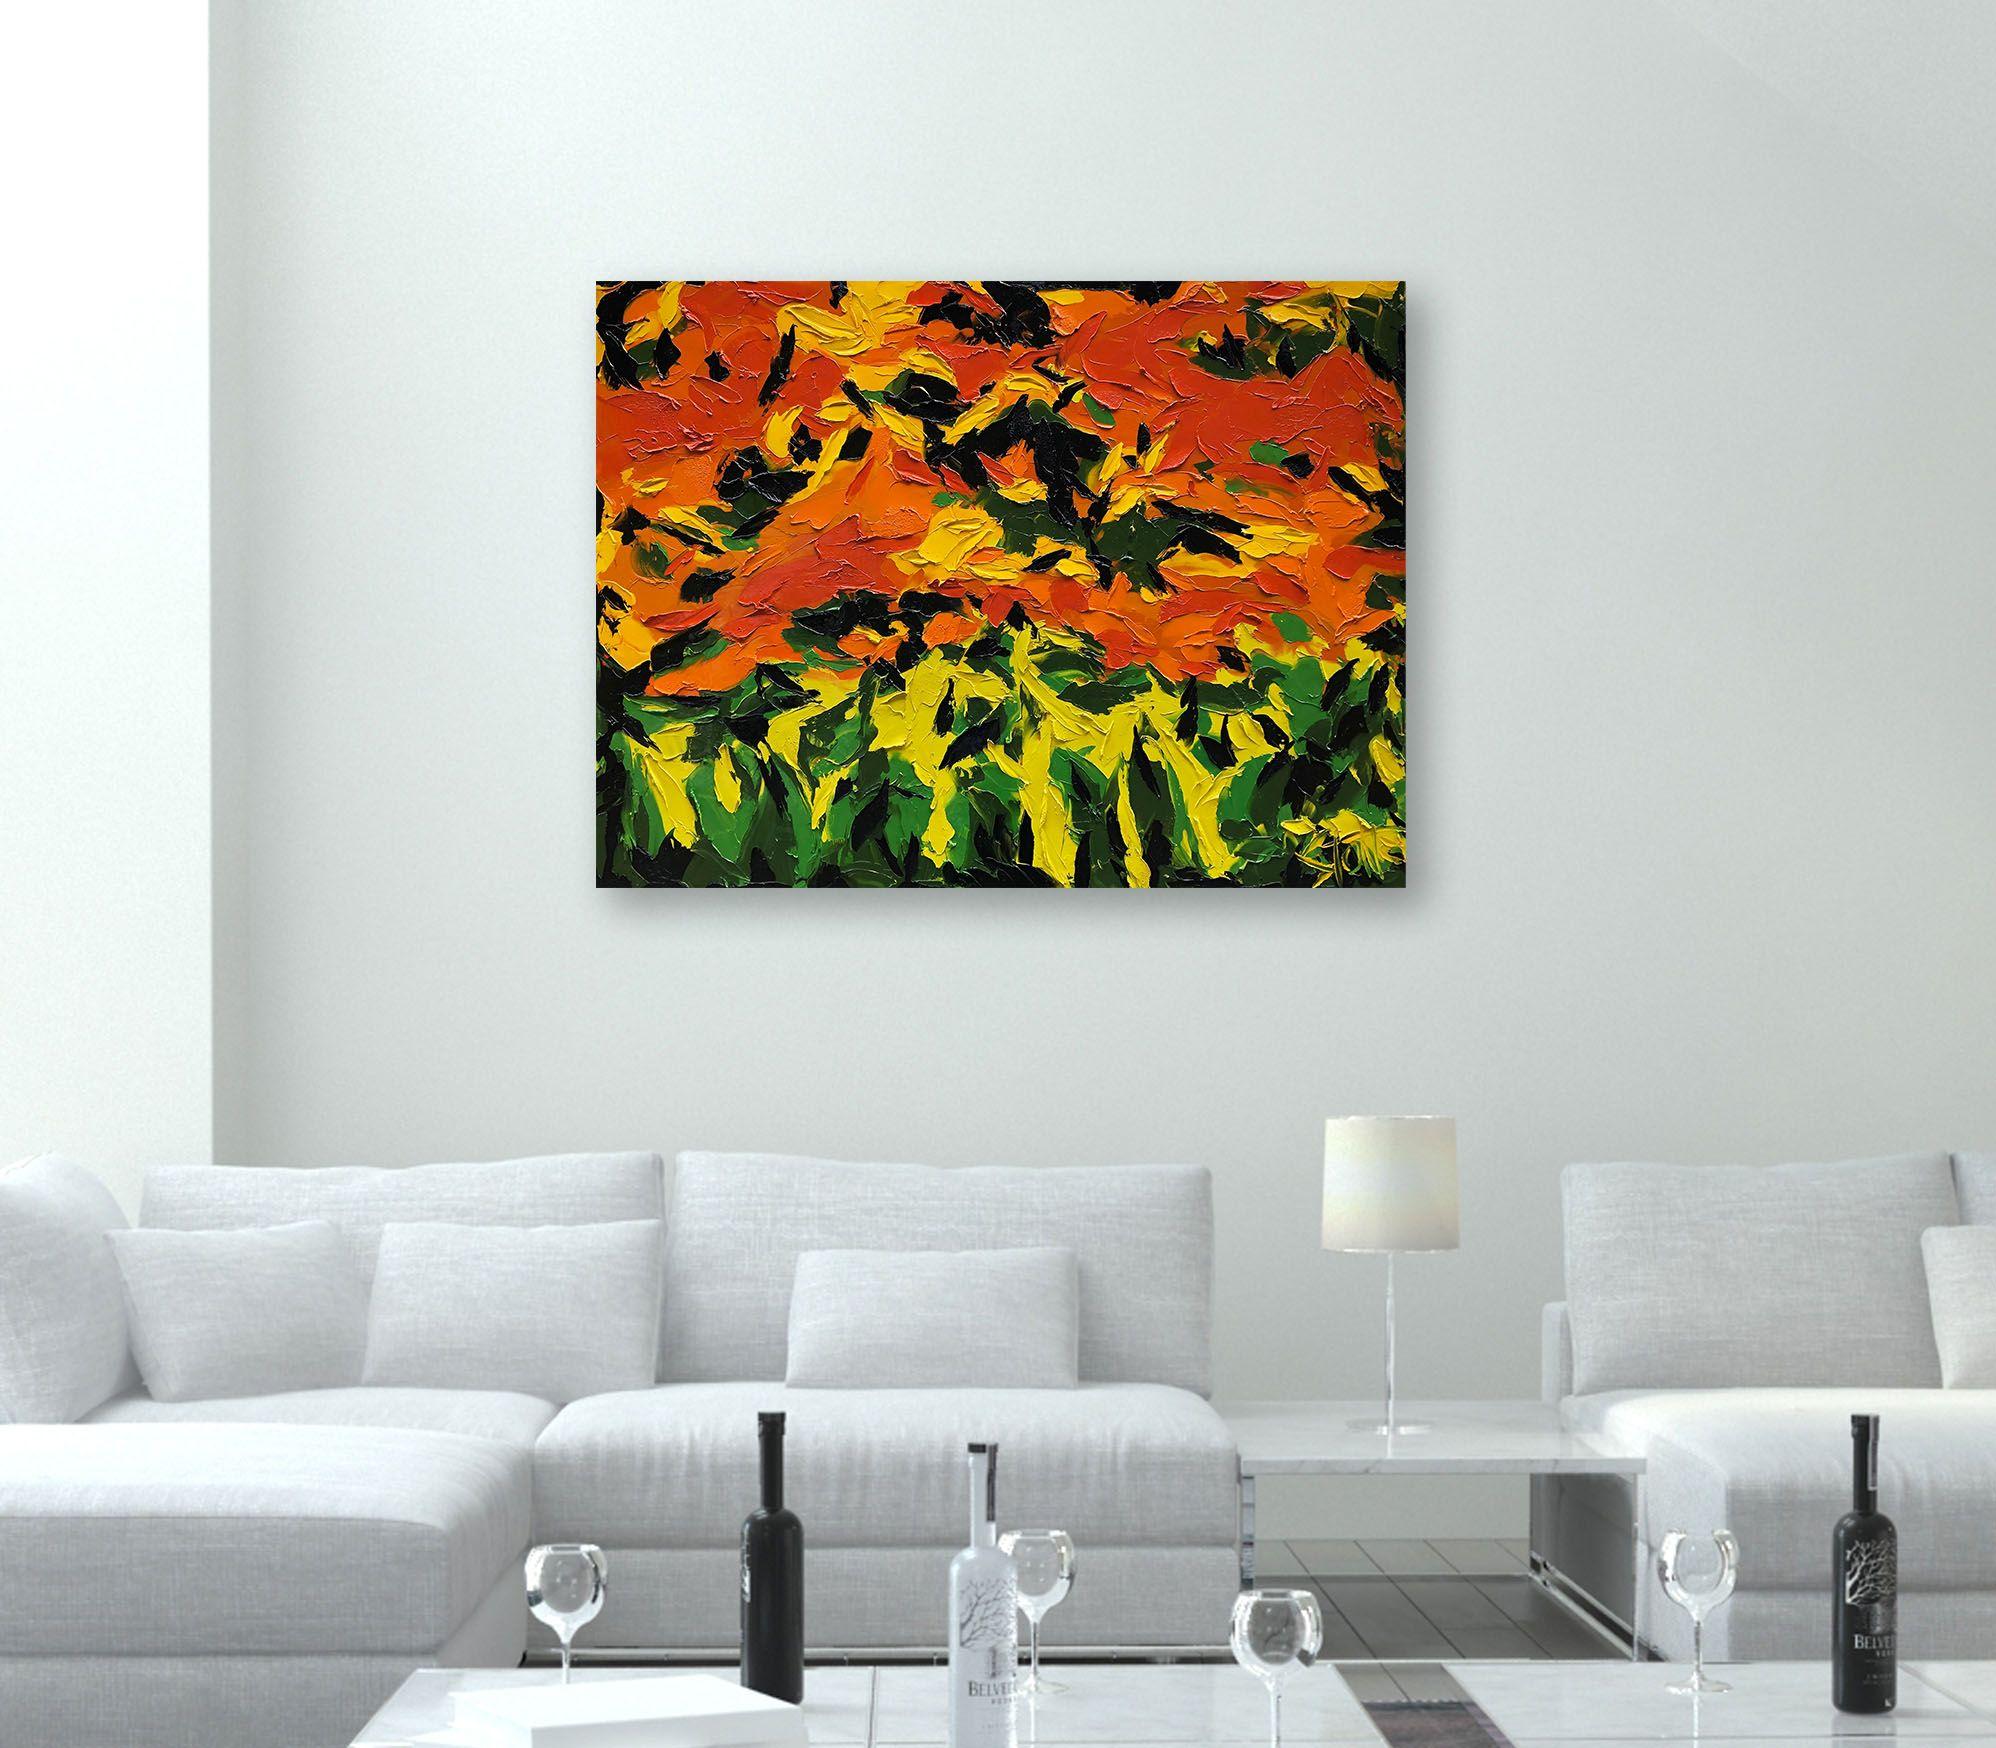 ORANGE MORNING, Painting, Oil on Canvas - Orange Abstract Painting by Bill Stone